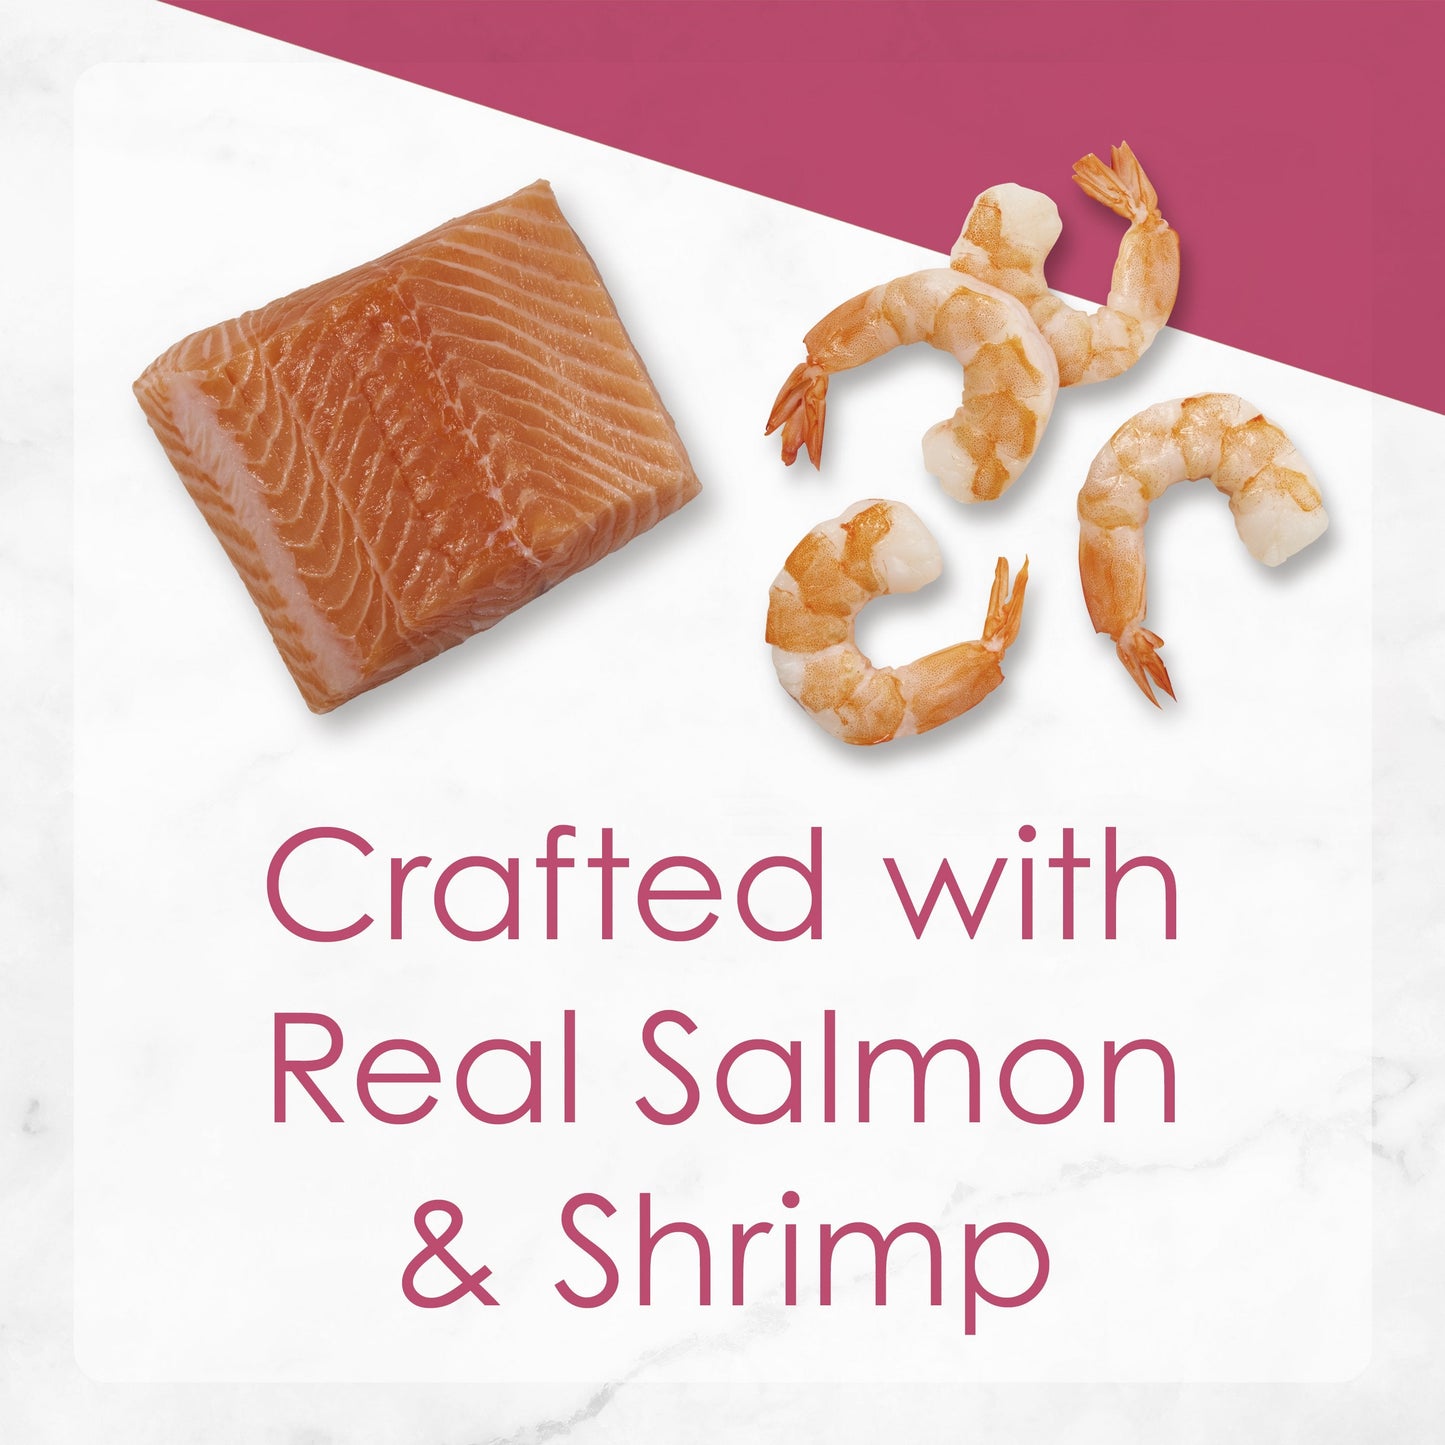 Crafted with real salmon and shrimp